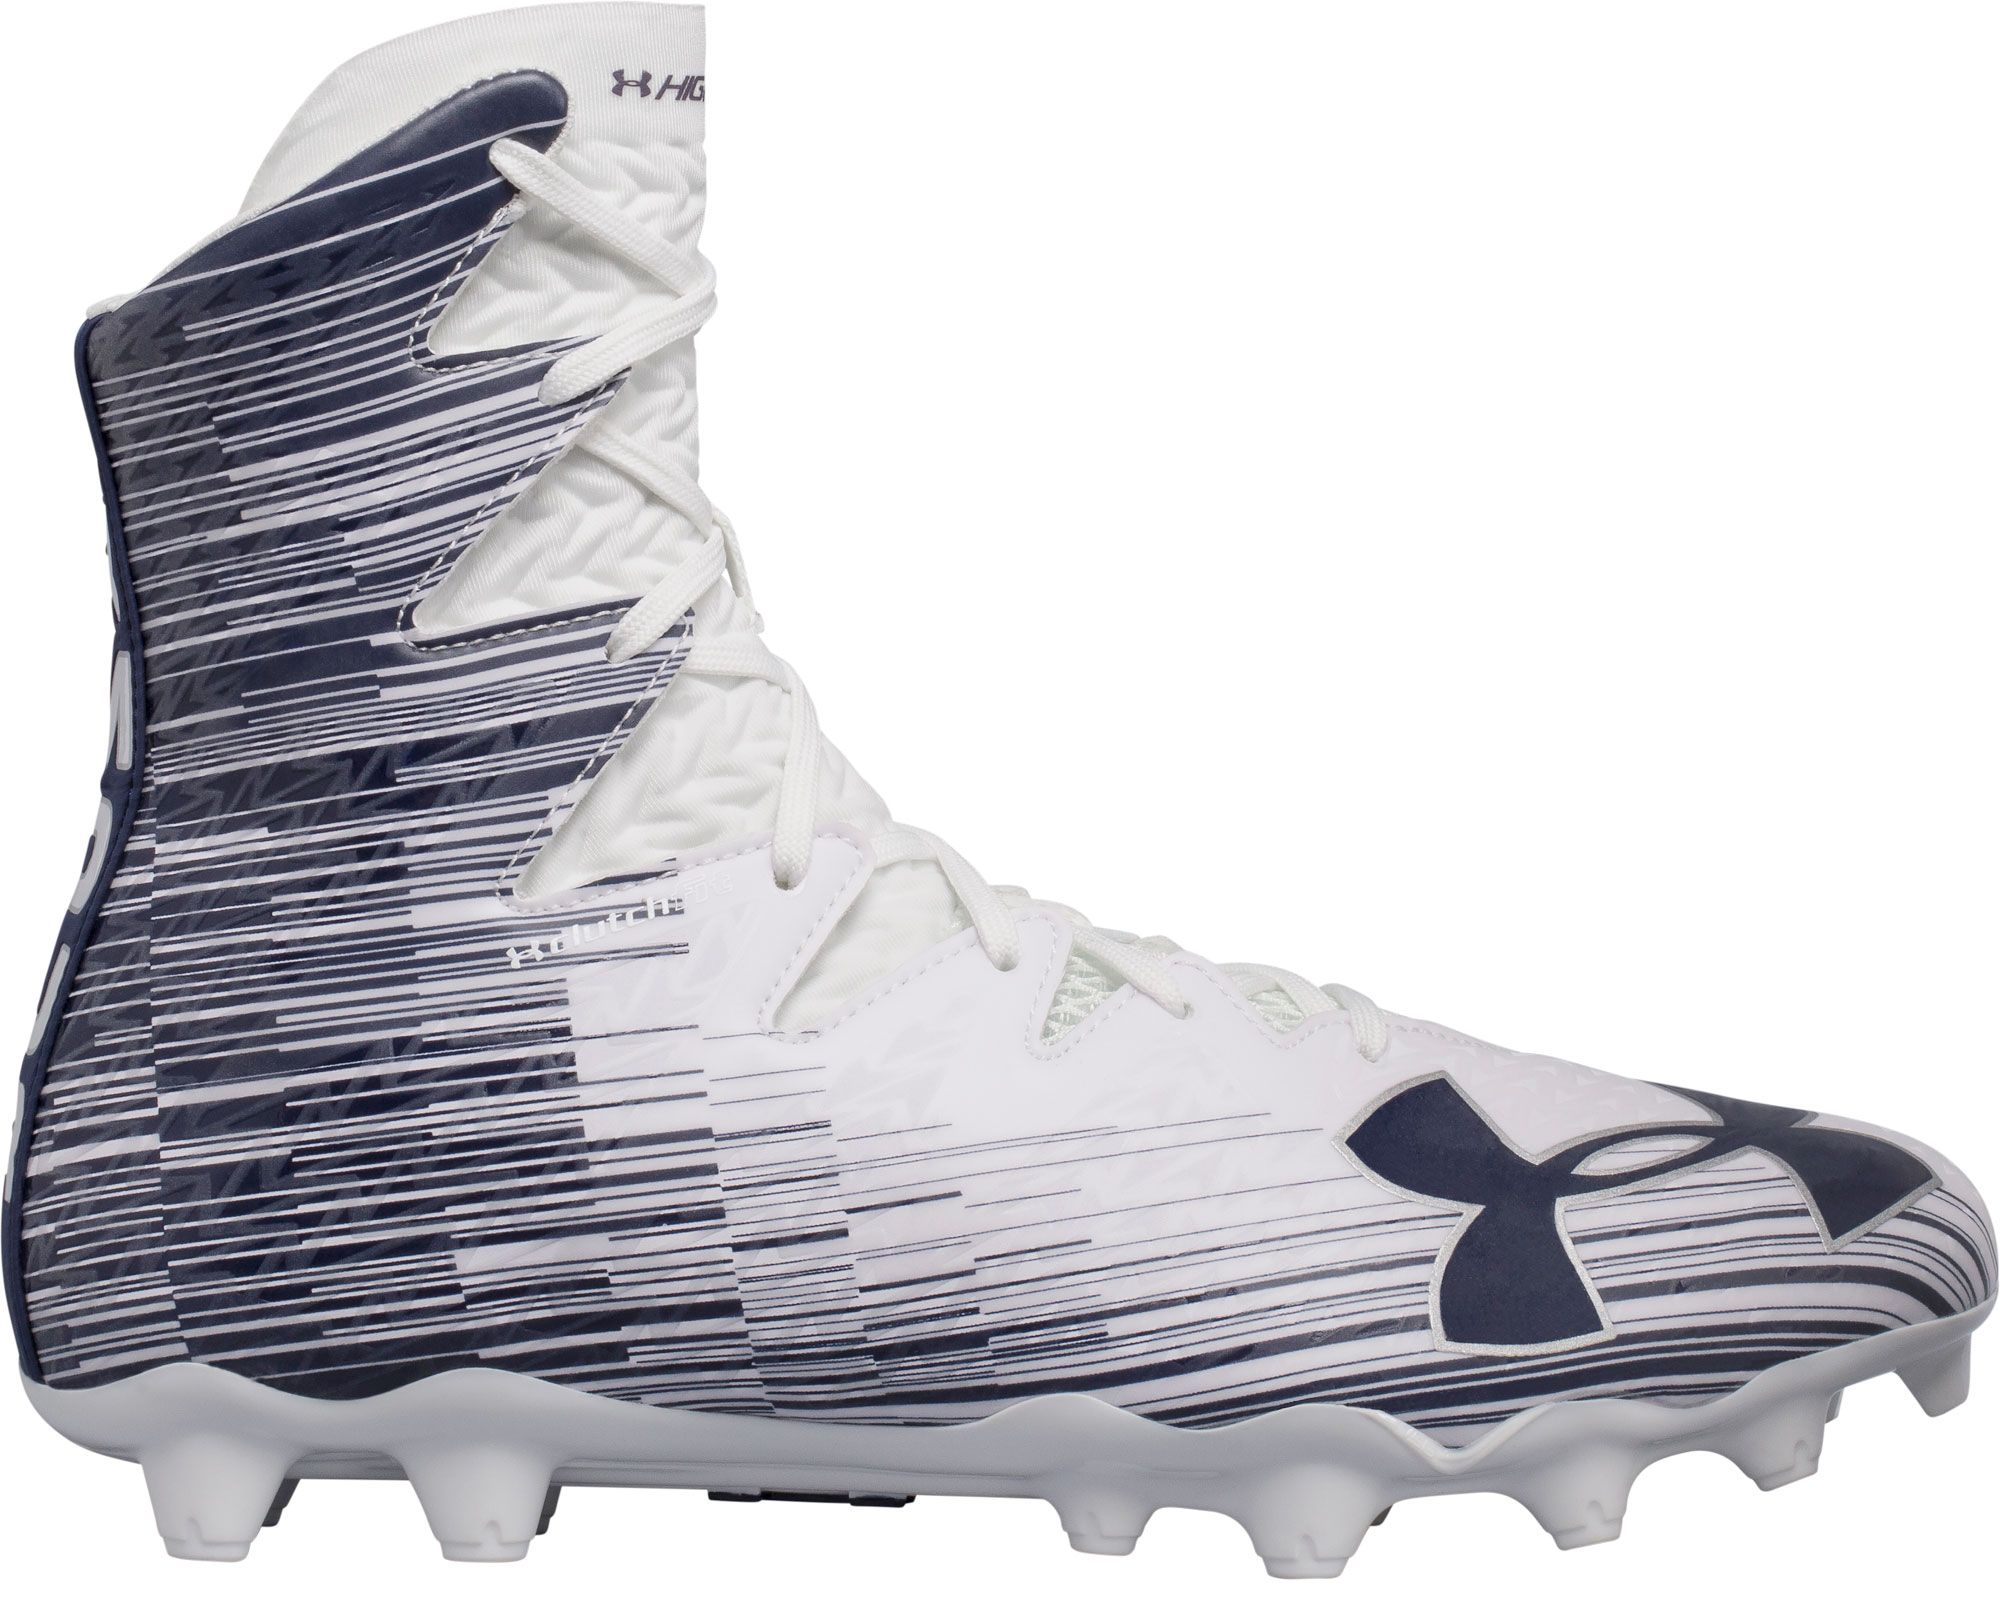 Lacrosse Cleats | DICK'S Sporting Goods